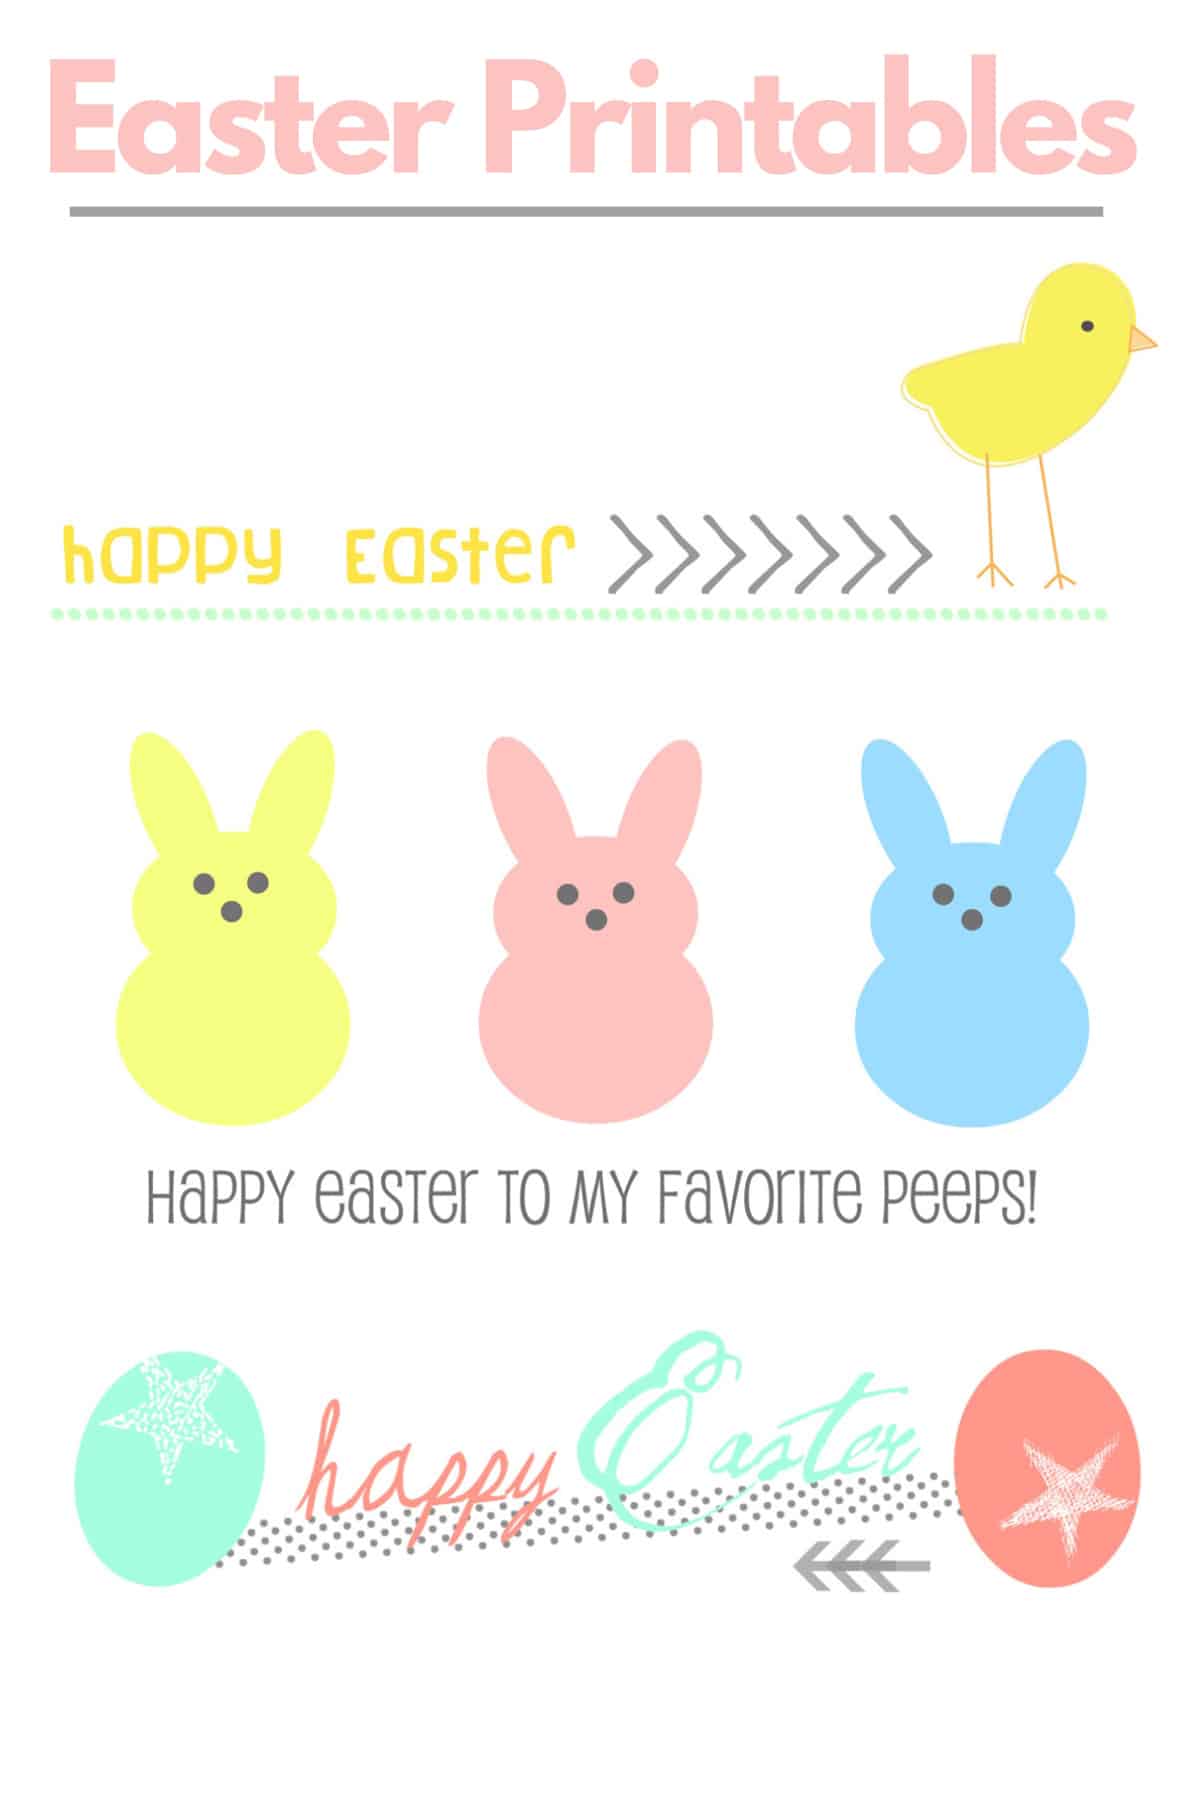 Easter printables collage.